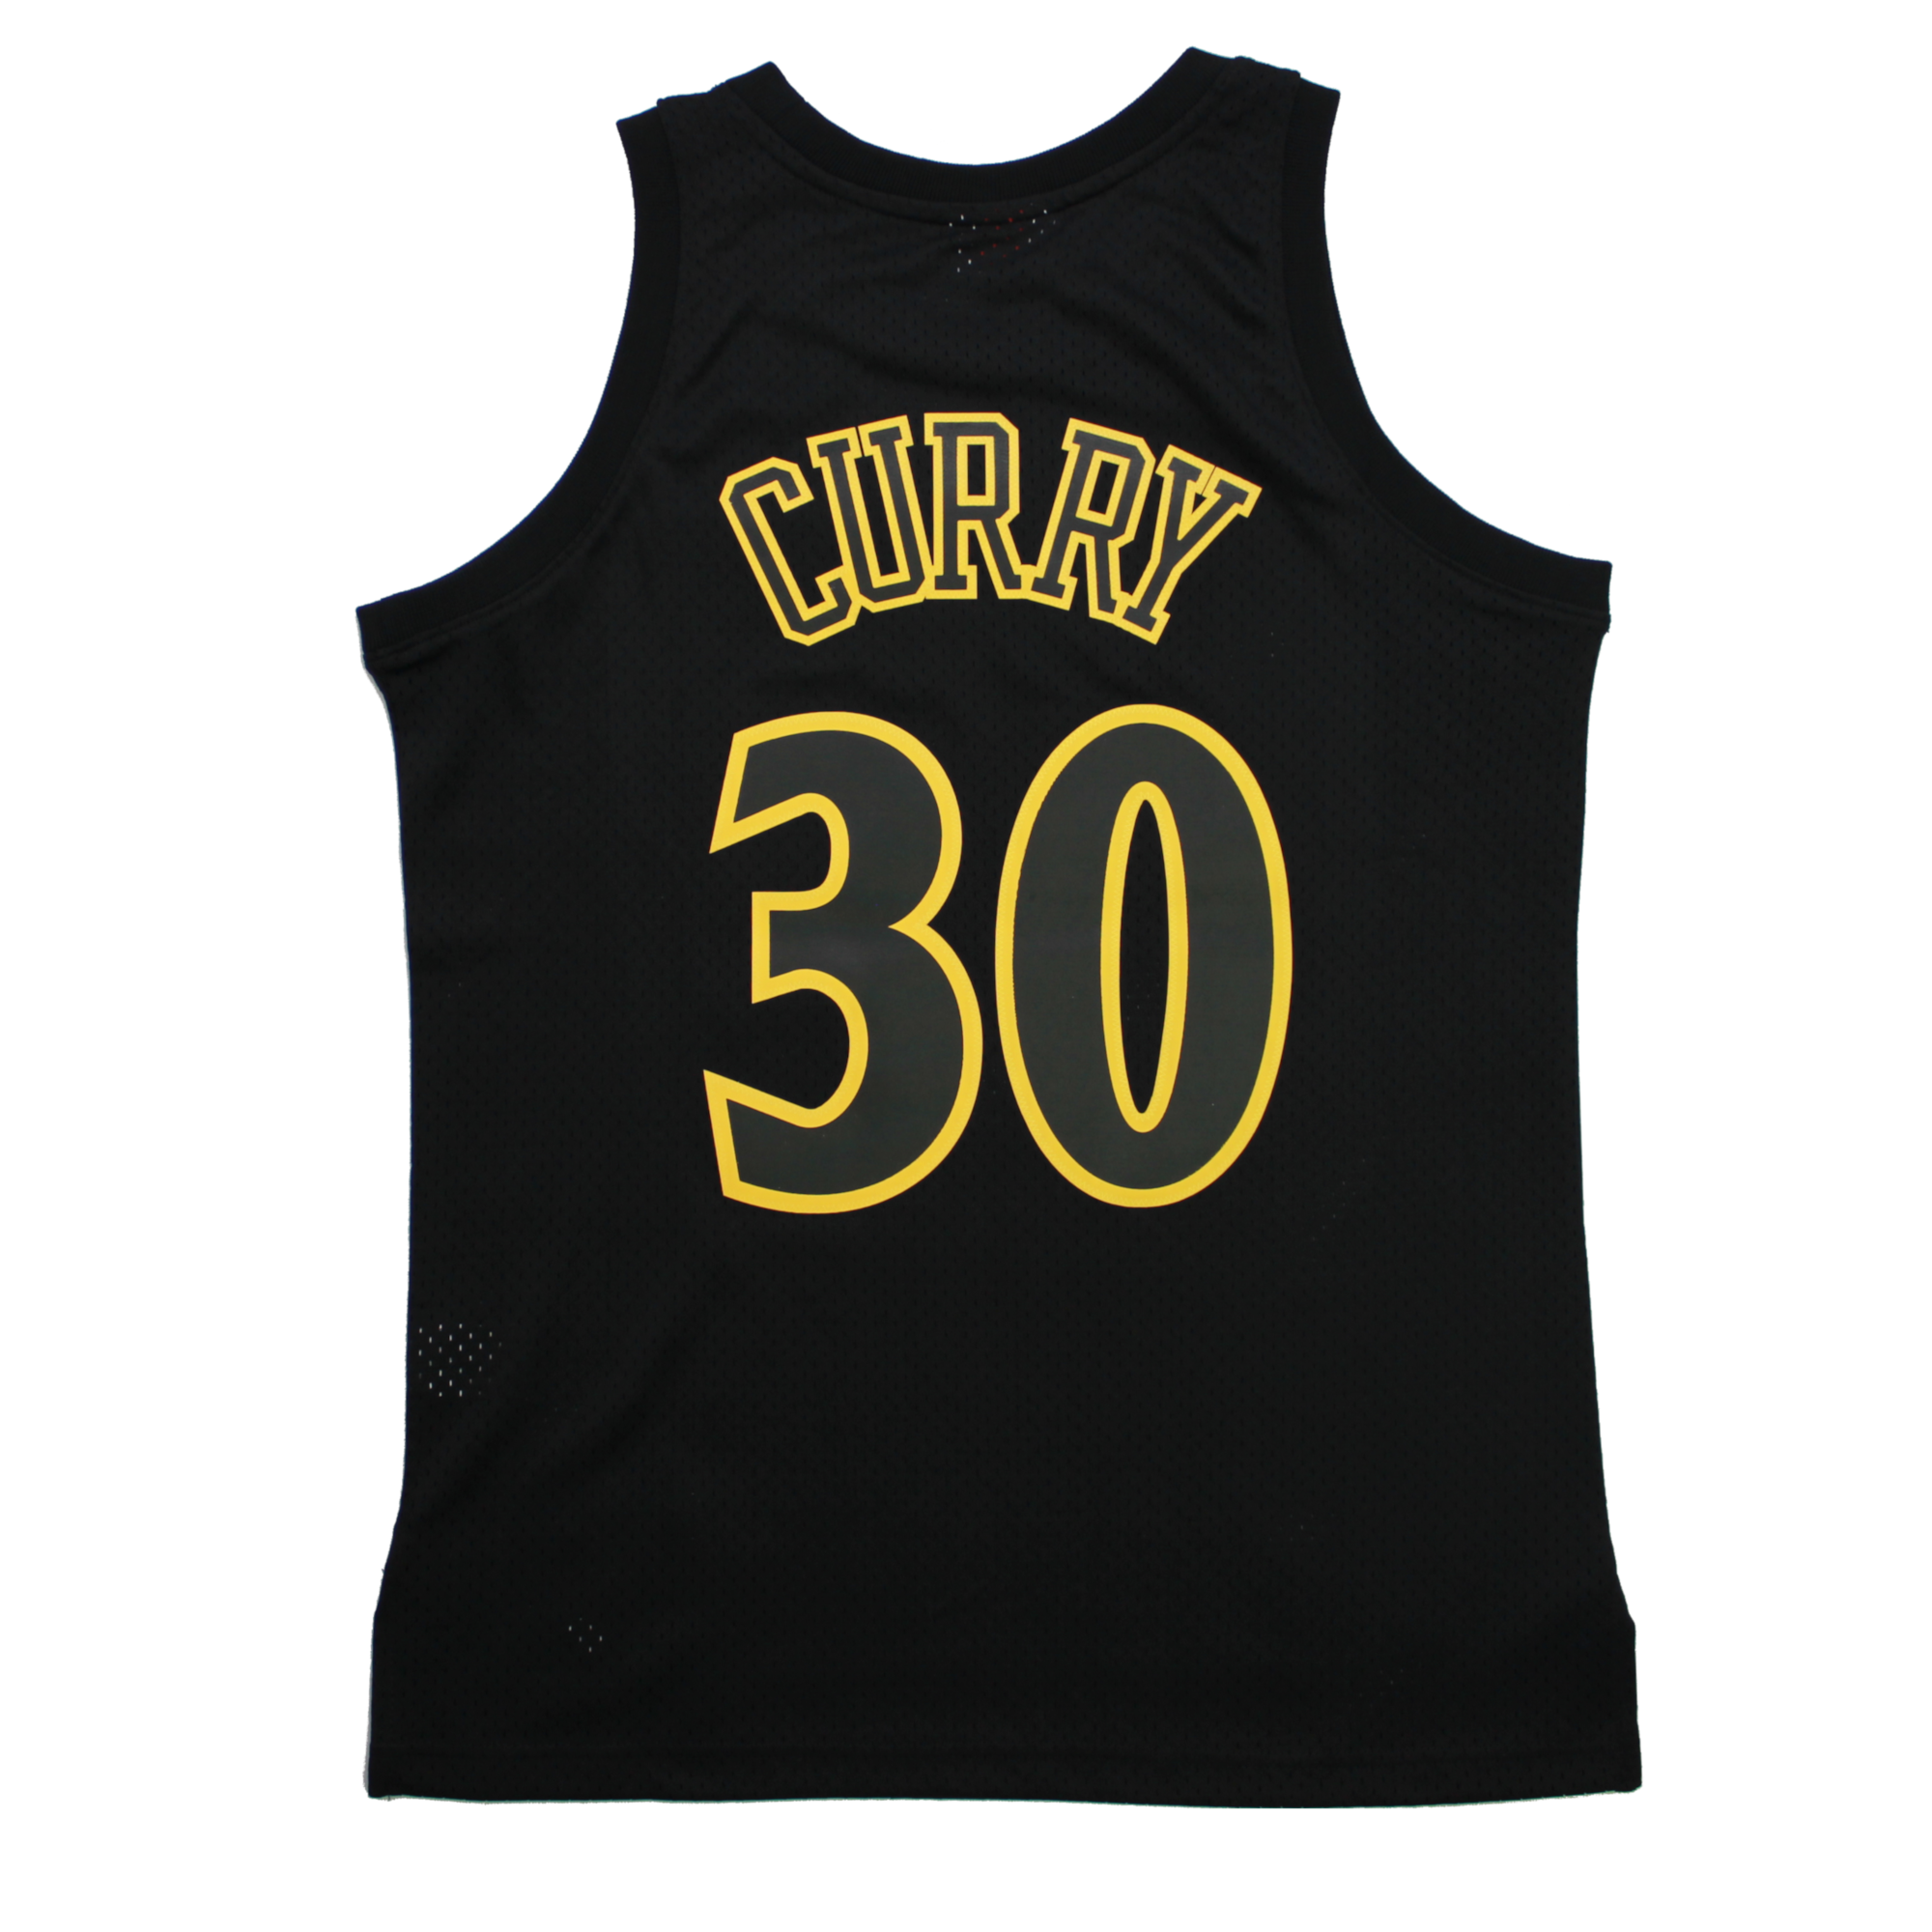 stephen curry jersey and pants